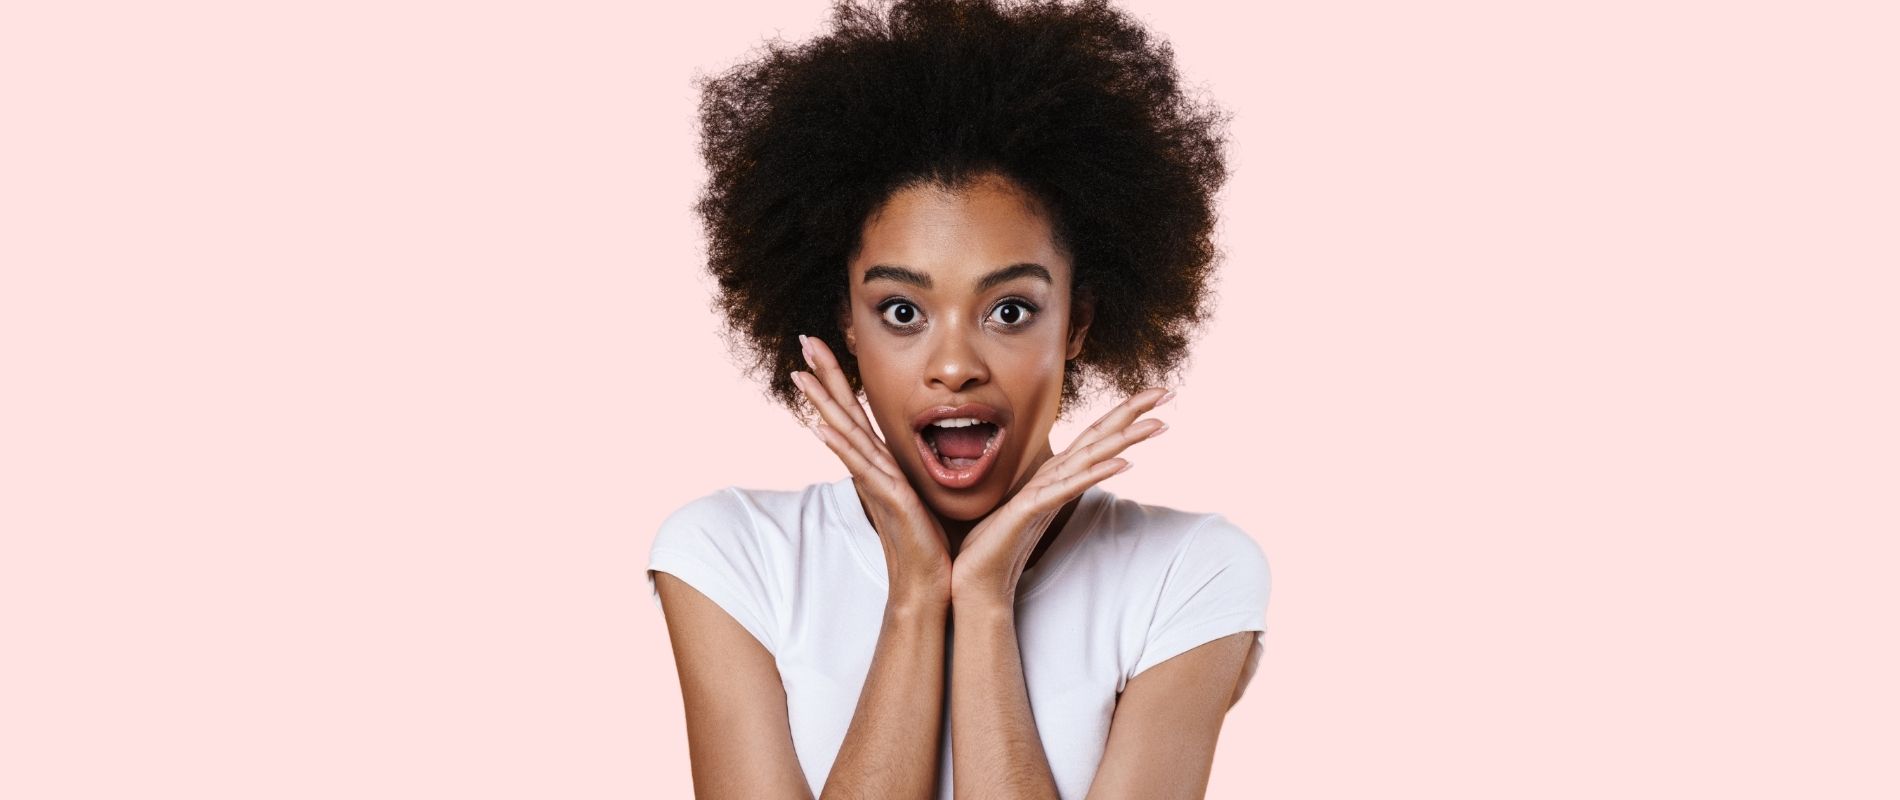 10 of The Worst Natural Hair Advice I’ve Been Given